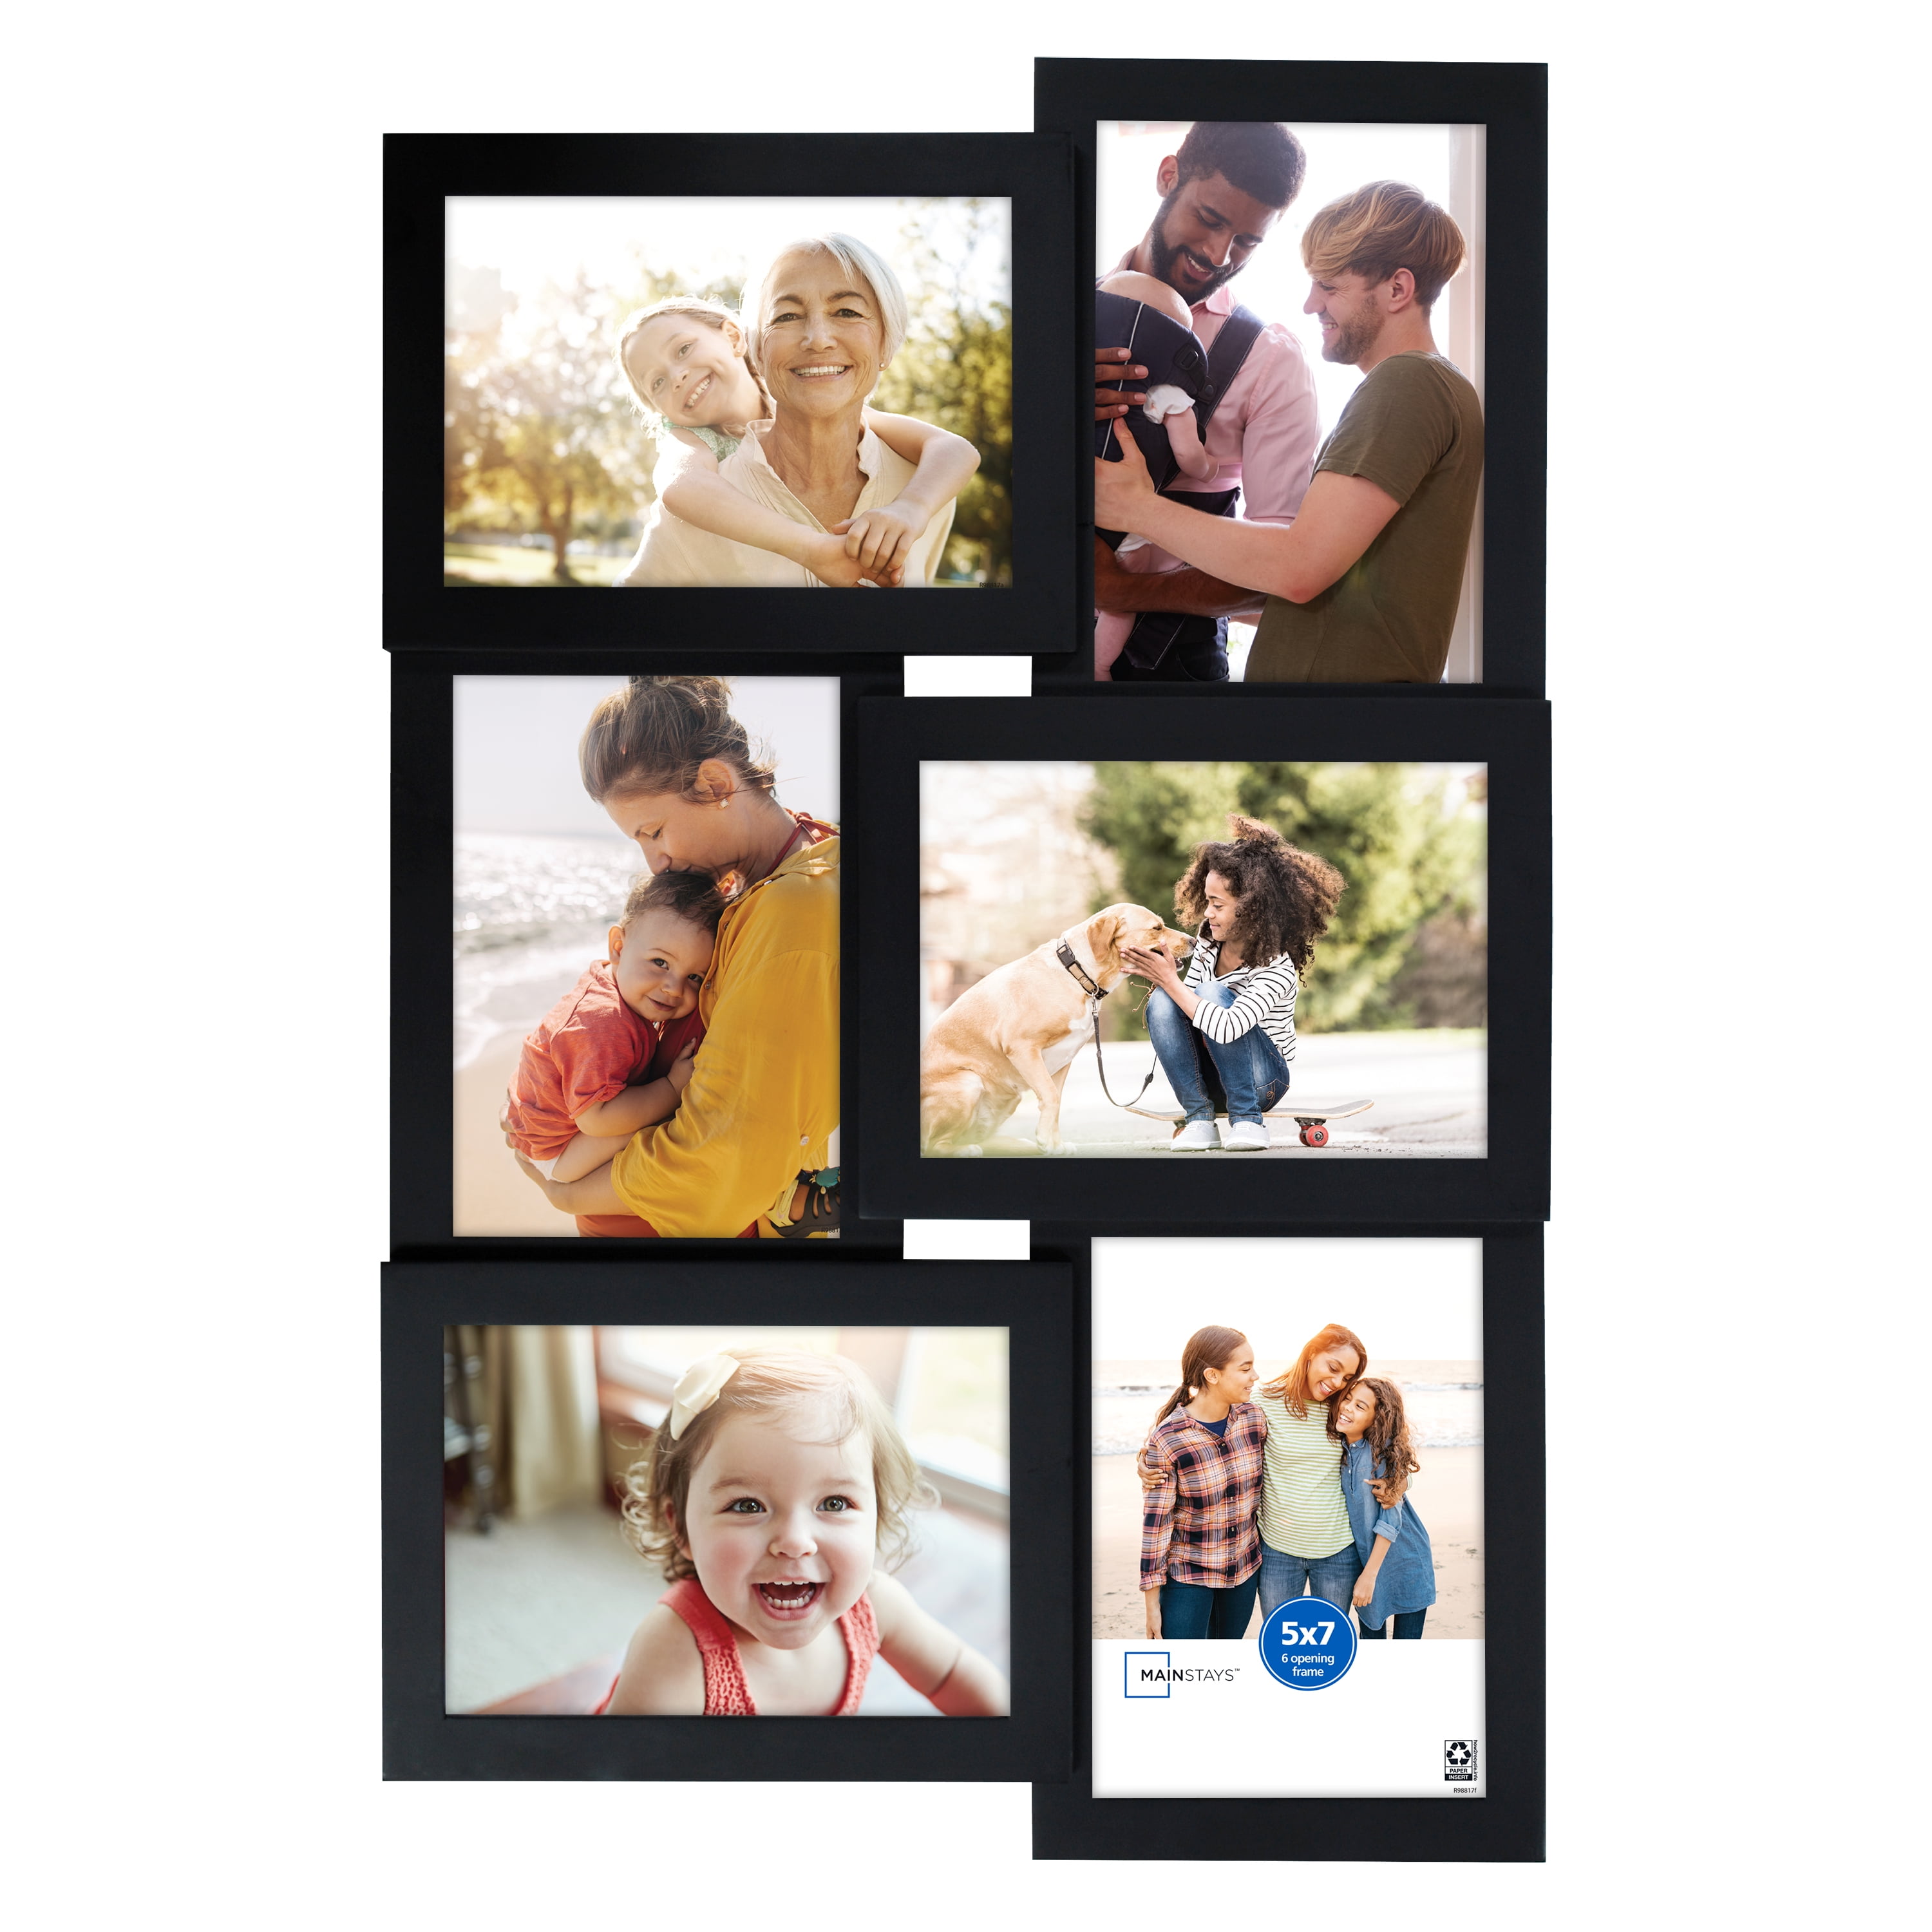 Details about   Mainstays 6-Opening 5x7 Inch Collage Frame Matte Black Finish Wall Home Decor 